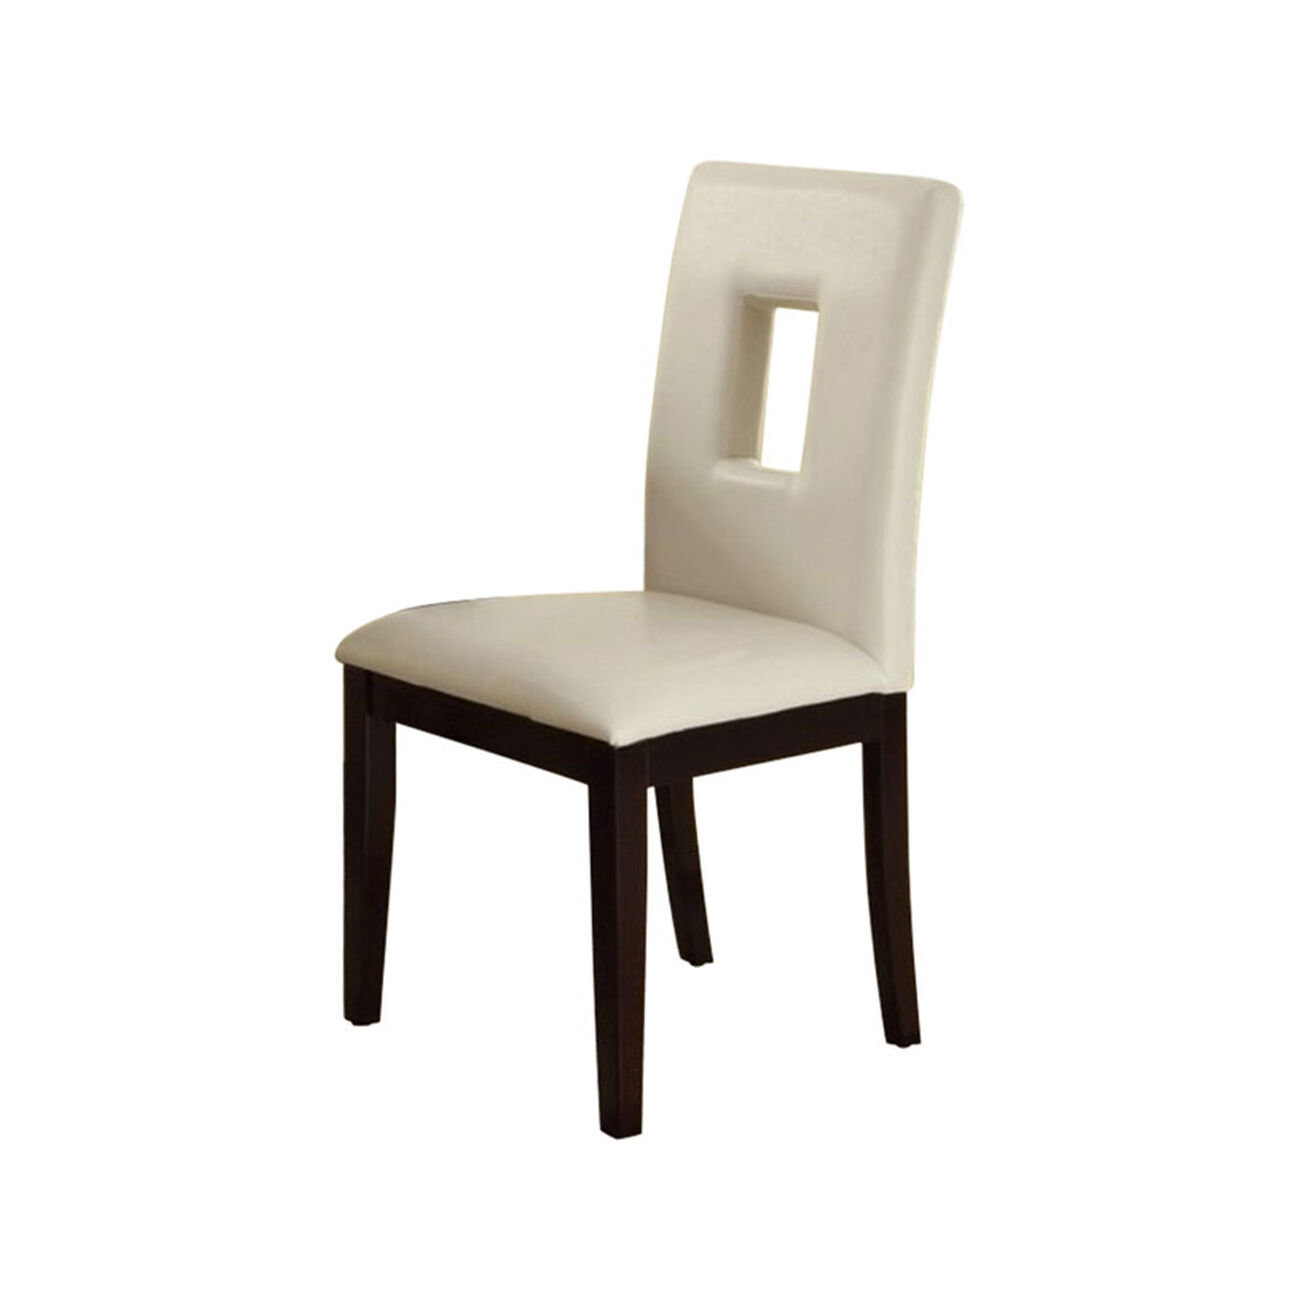 Pine Wood Dining Chairs, Set Of 2, White And Brown